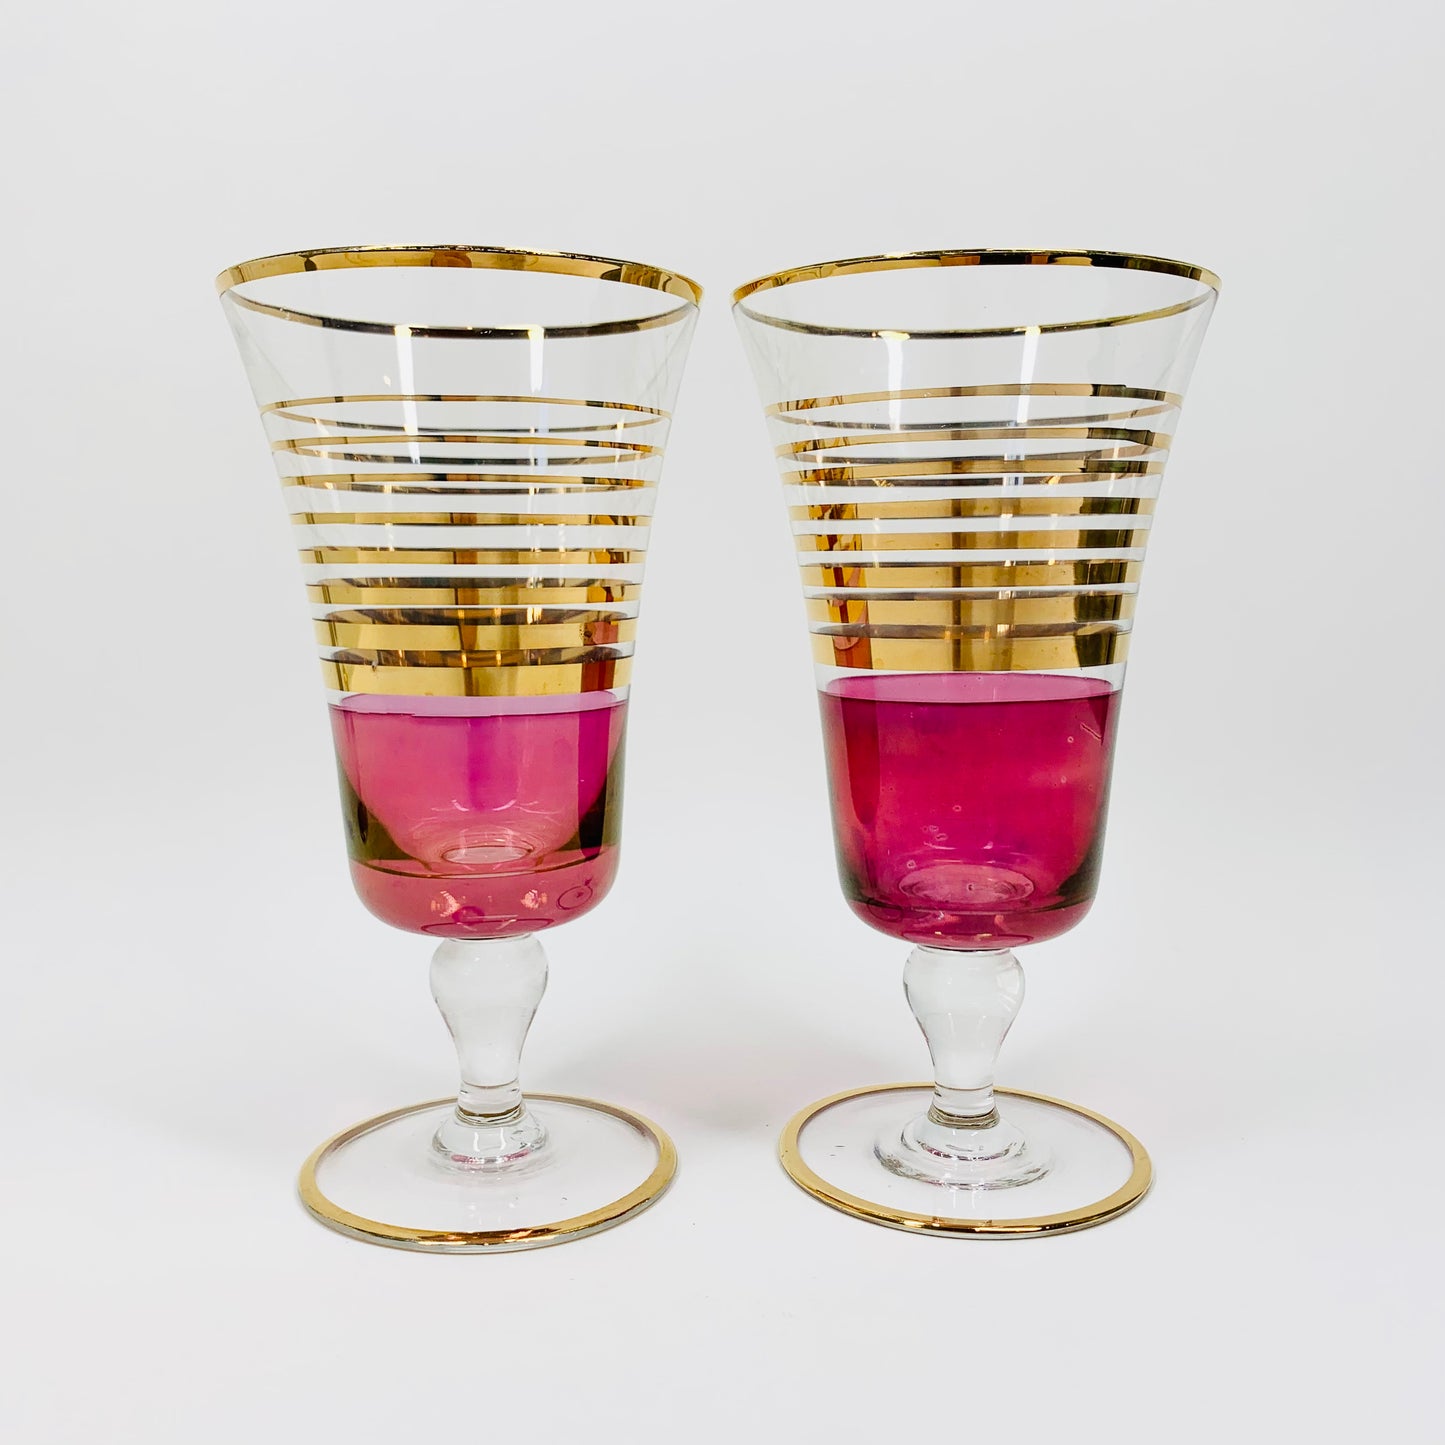 Extremely rare 1940s gold gilded pink flashed parfait/wine glasses